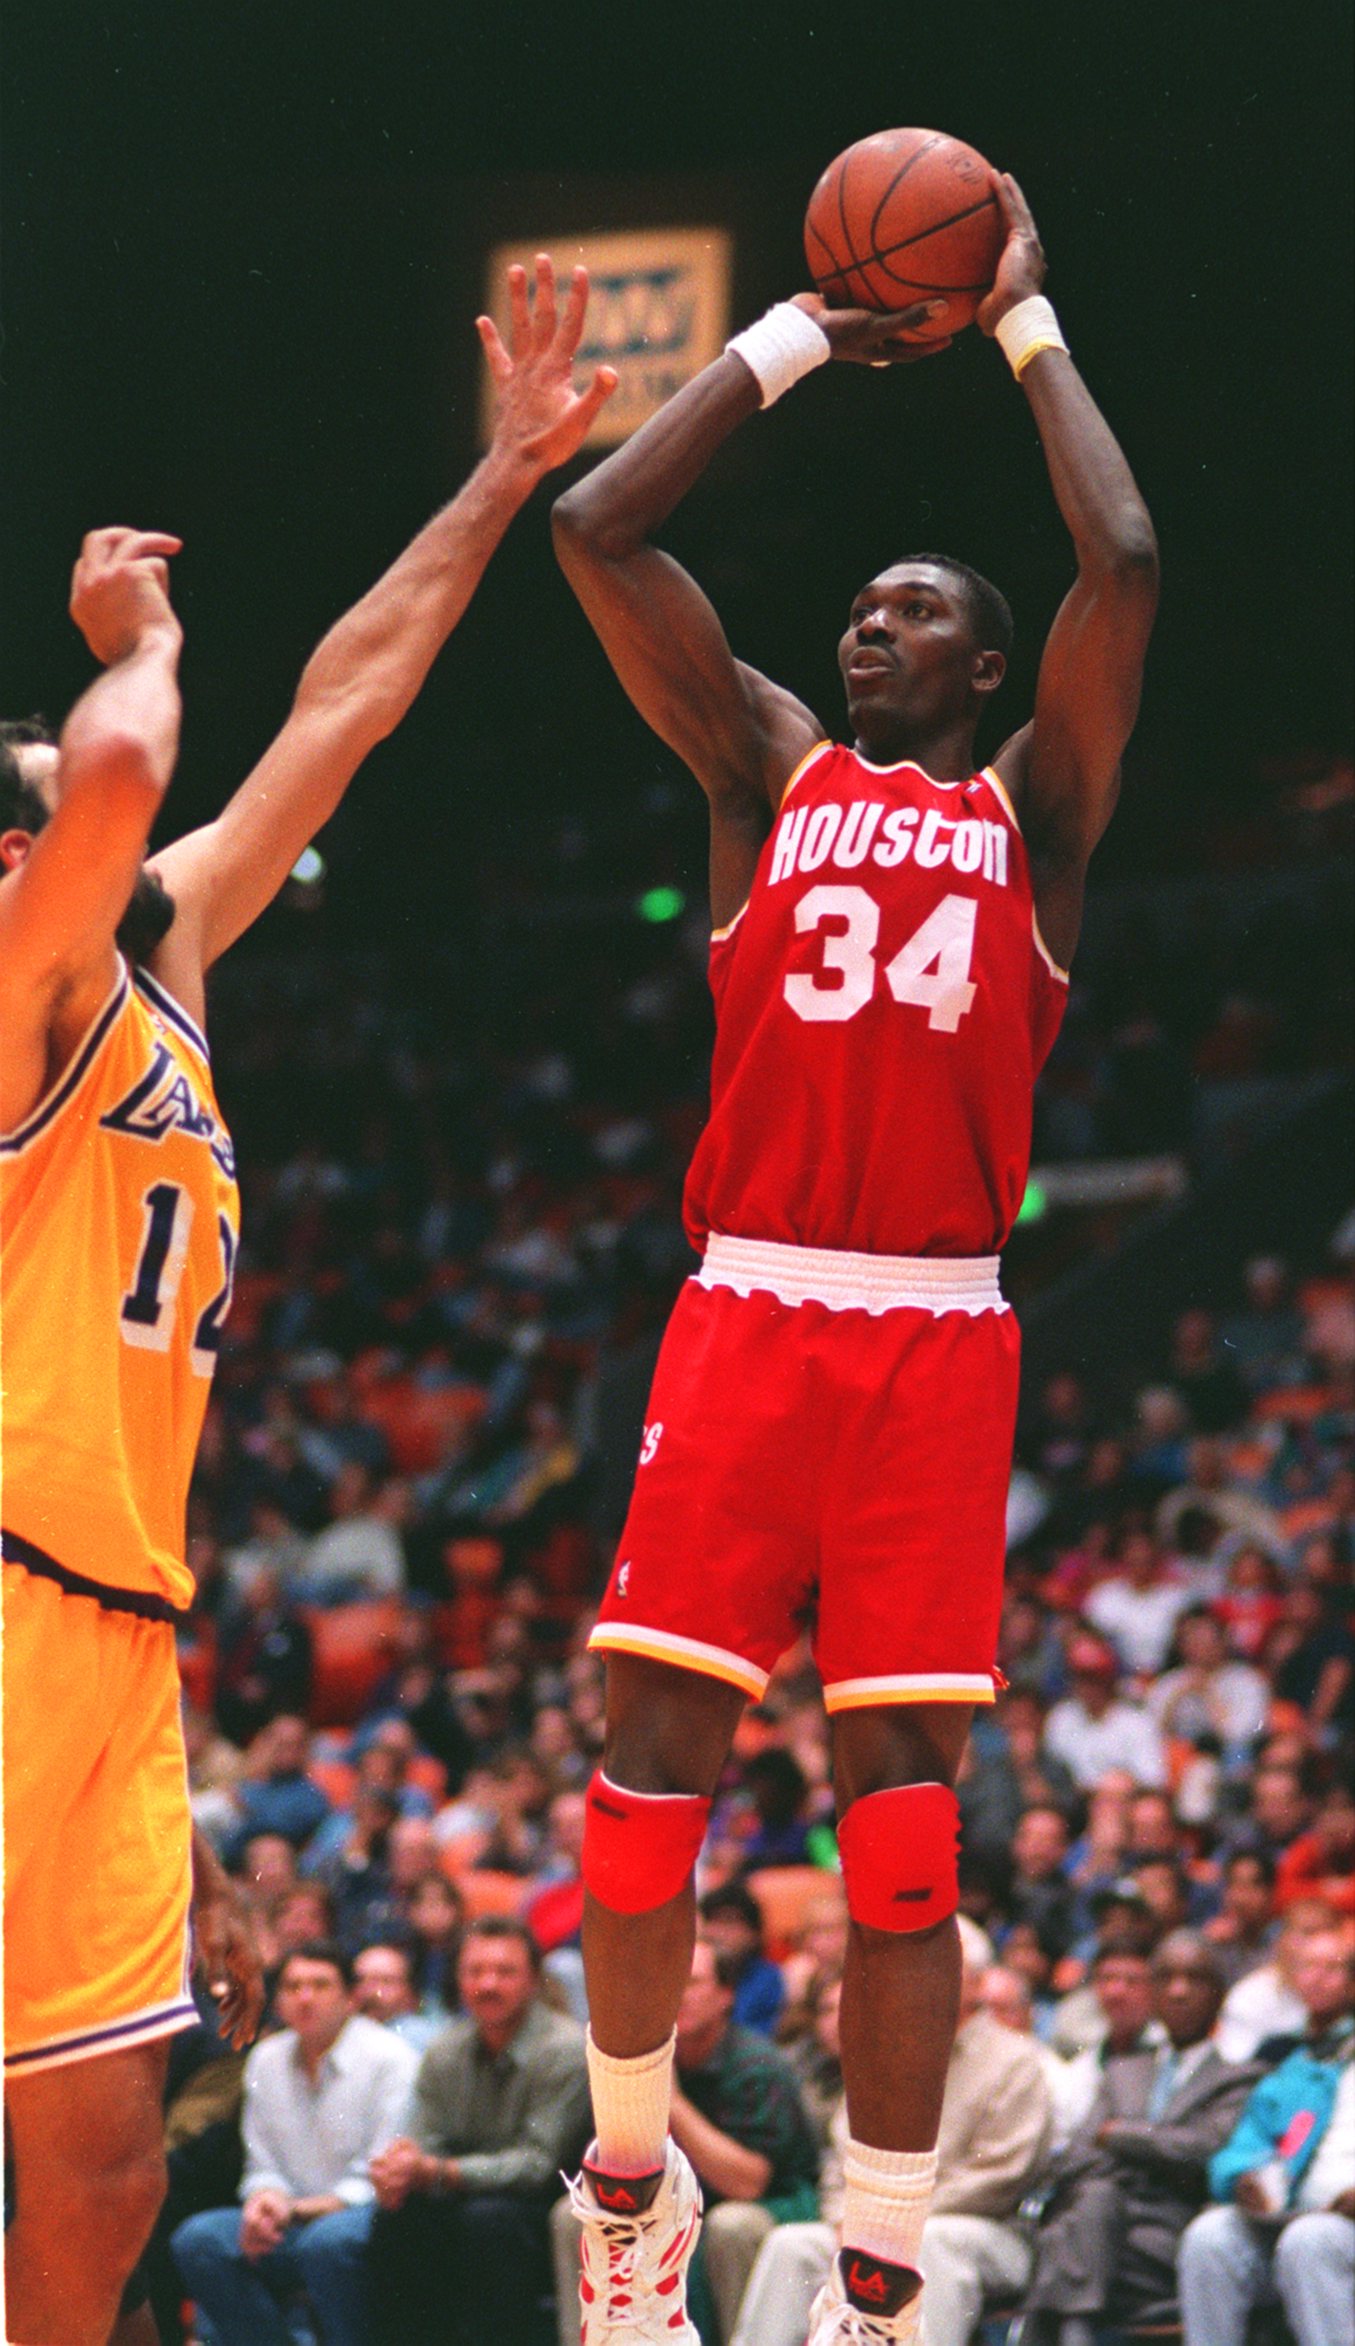 Olajuwon's supreme quickness and precise footwork lands him fourth best all-time.